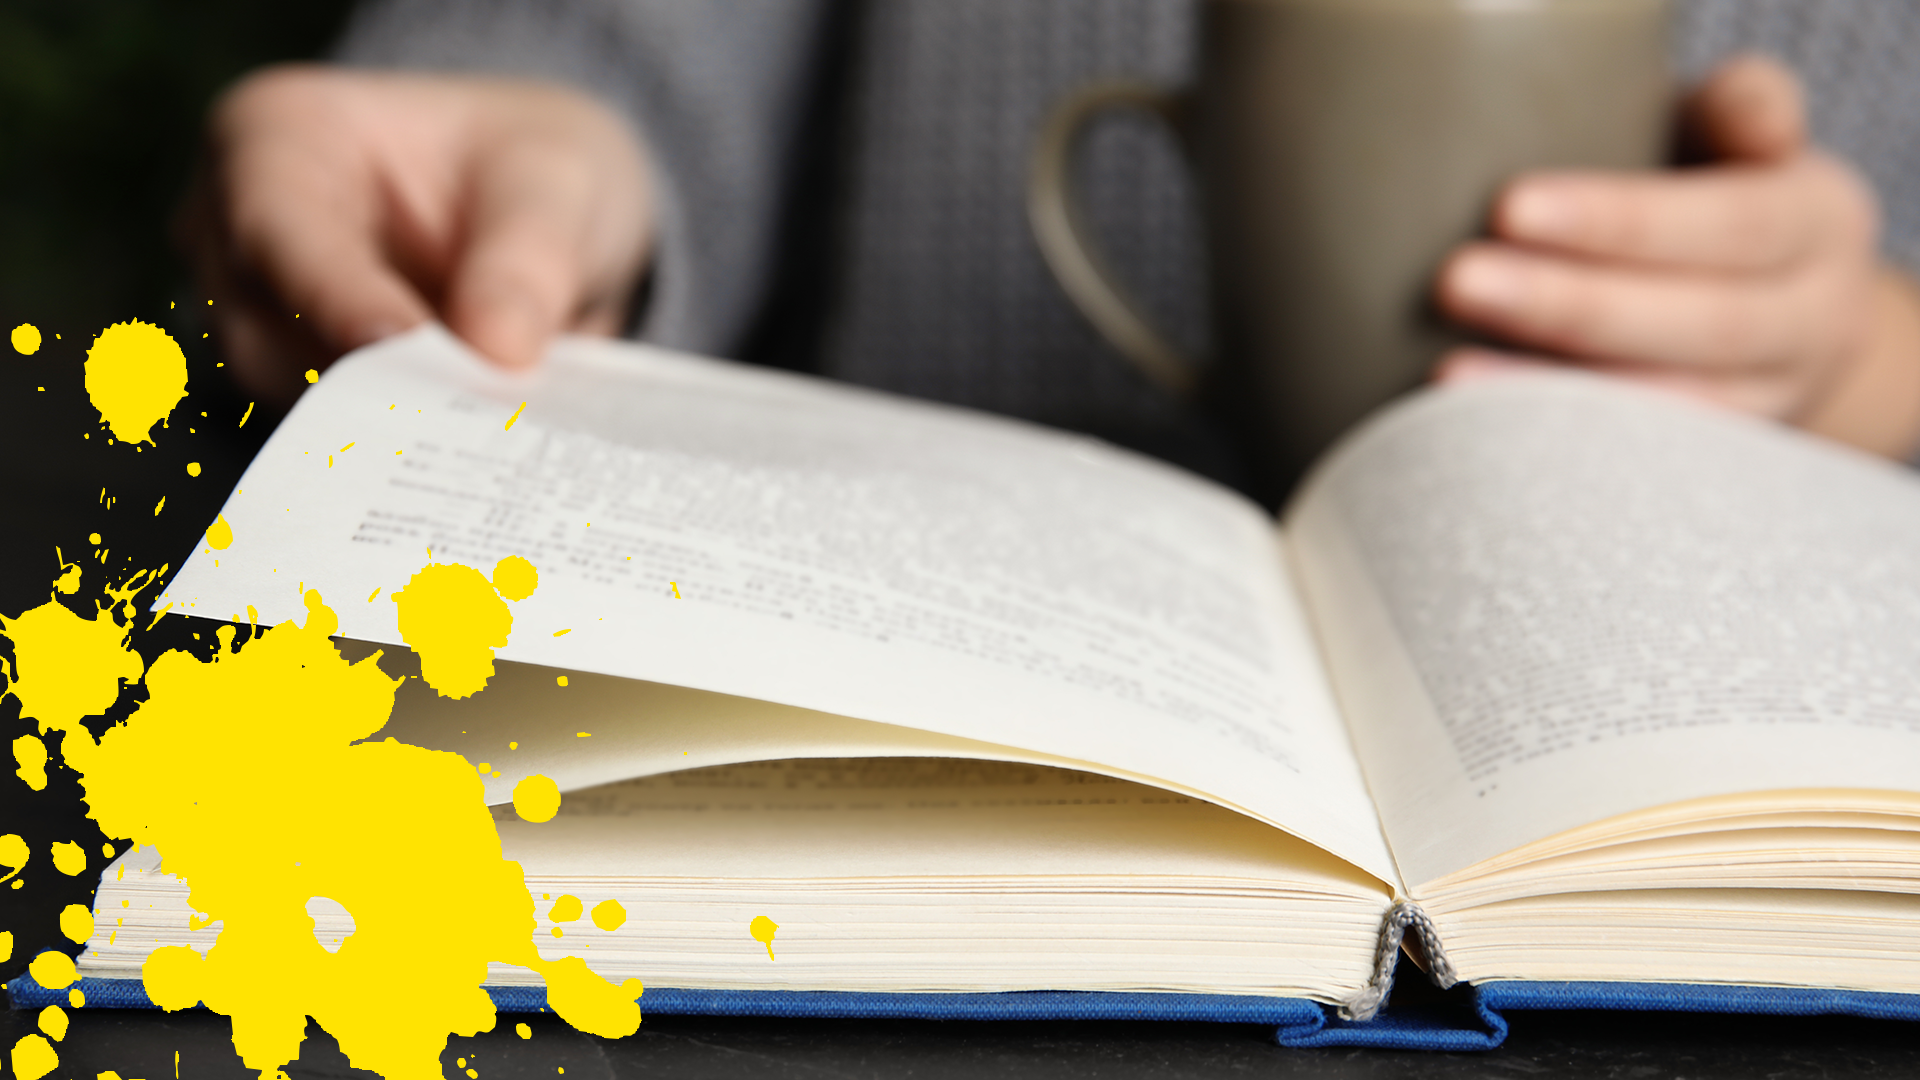 Someone reading a book with yellow splat